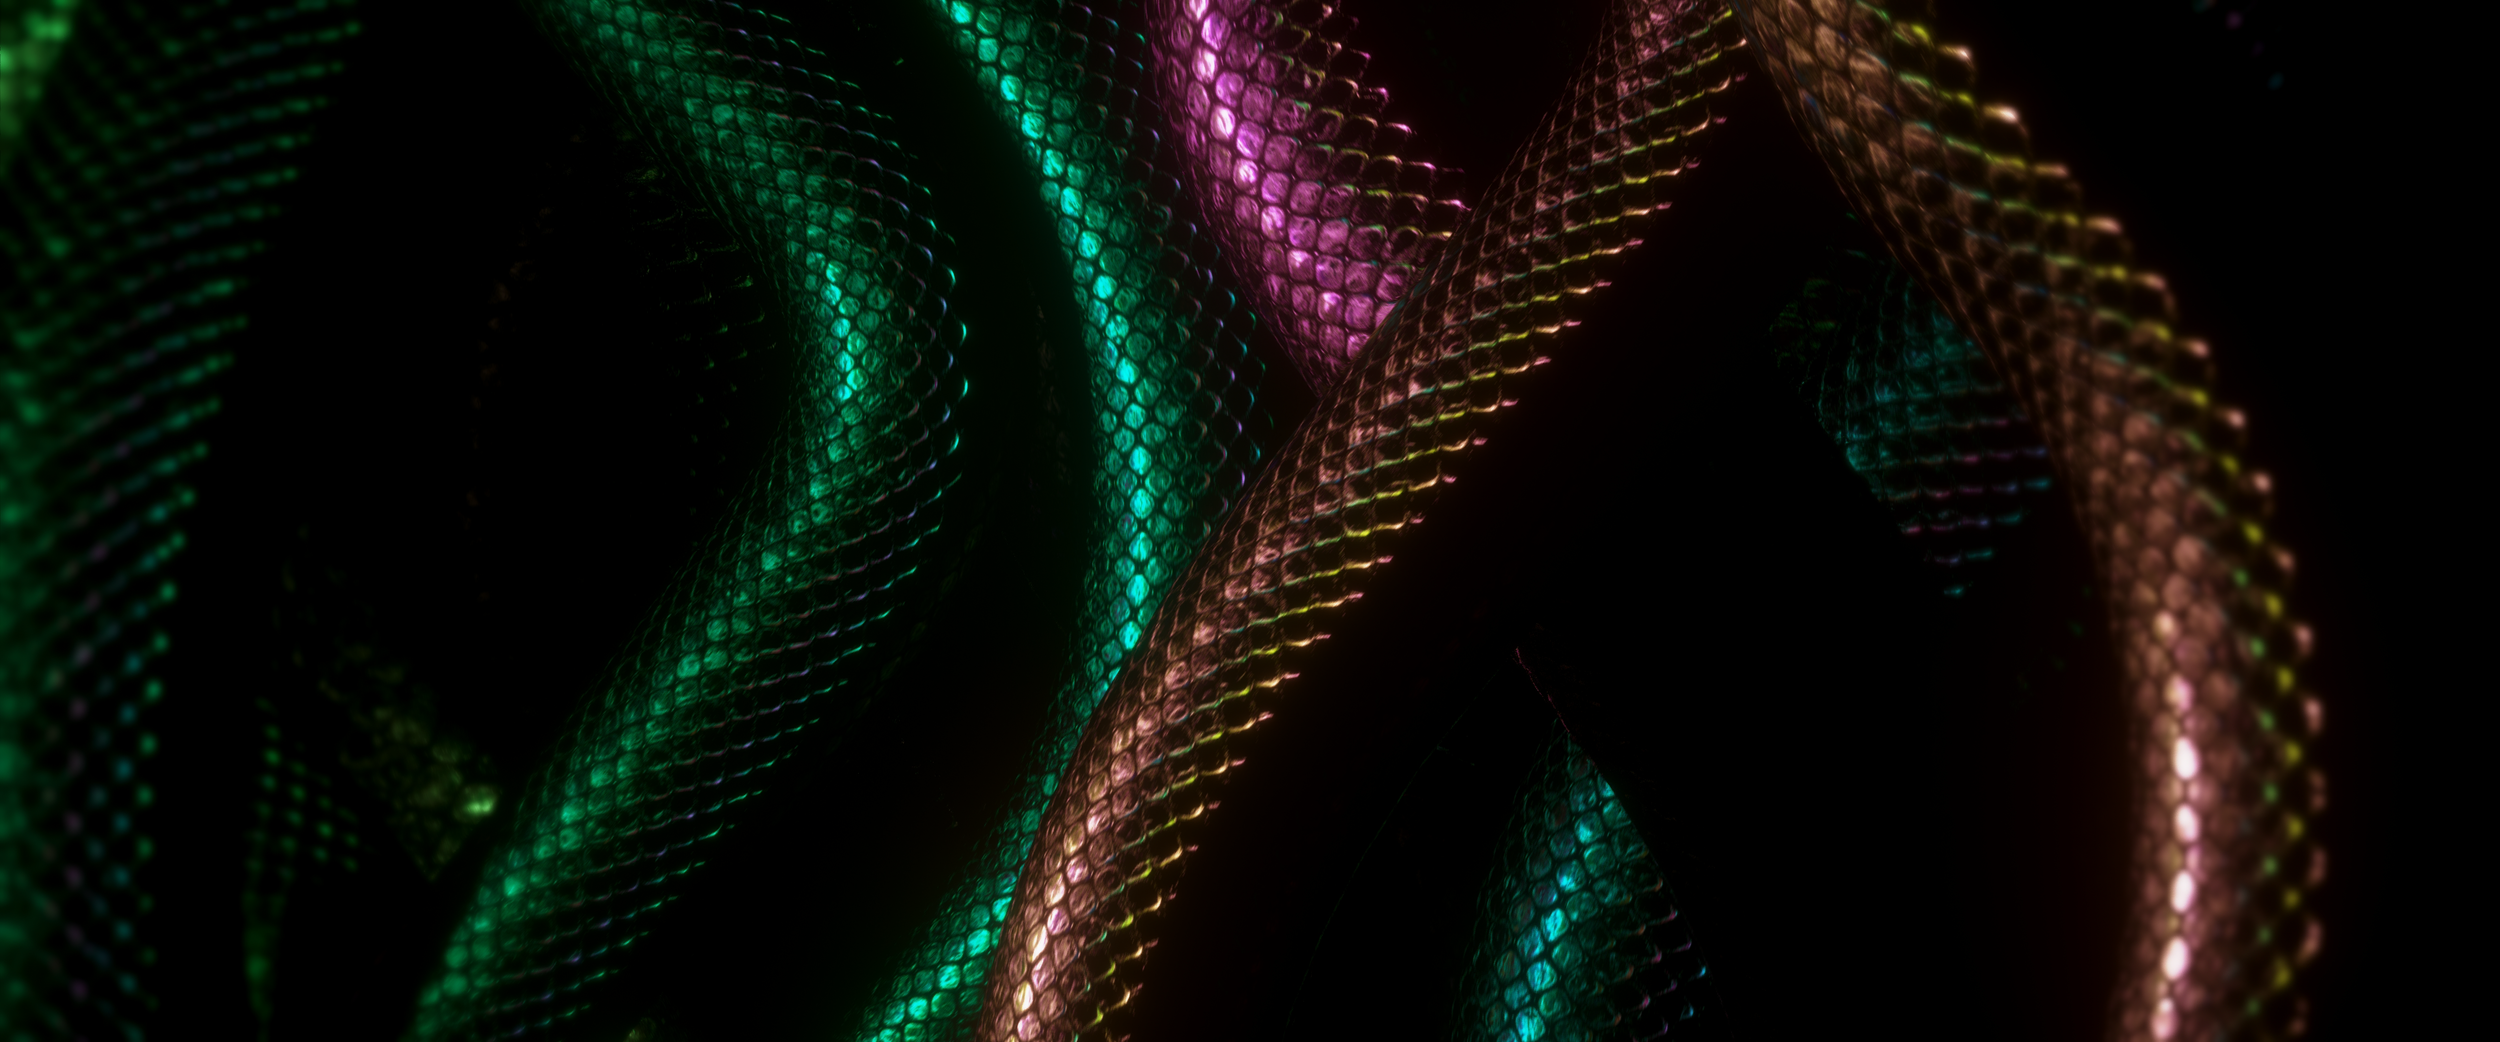 SNAKES_02 (0-00-01-05).png